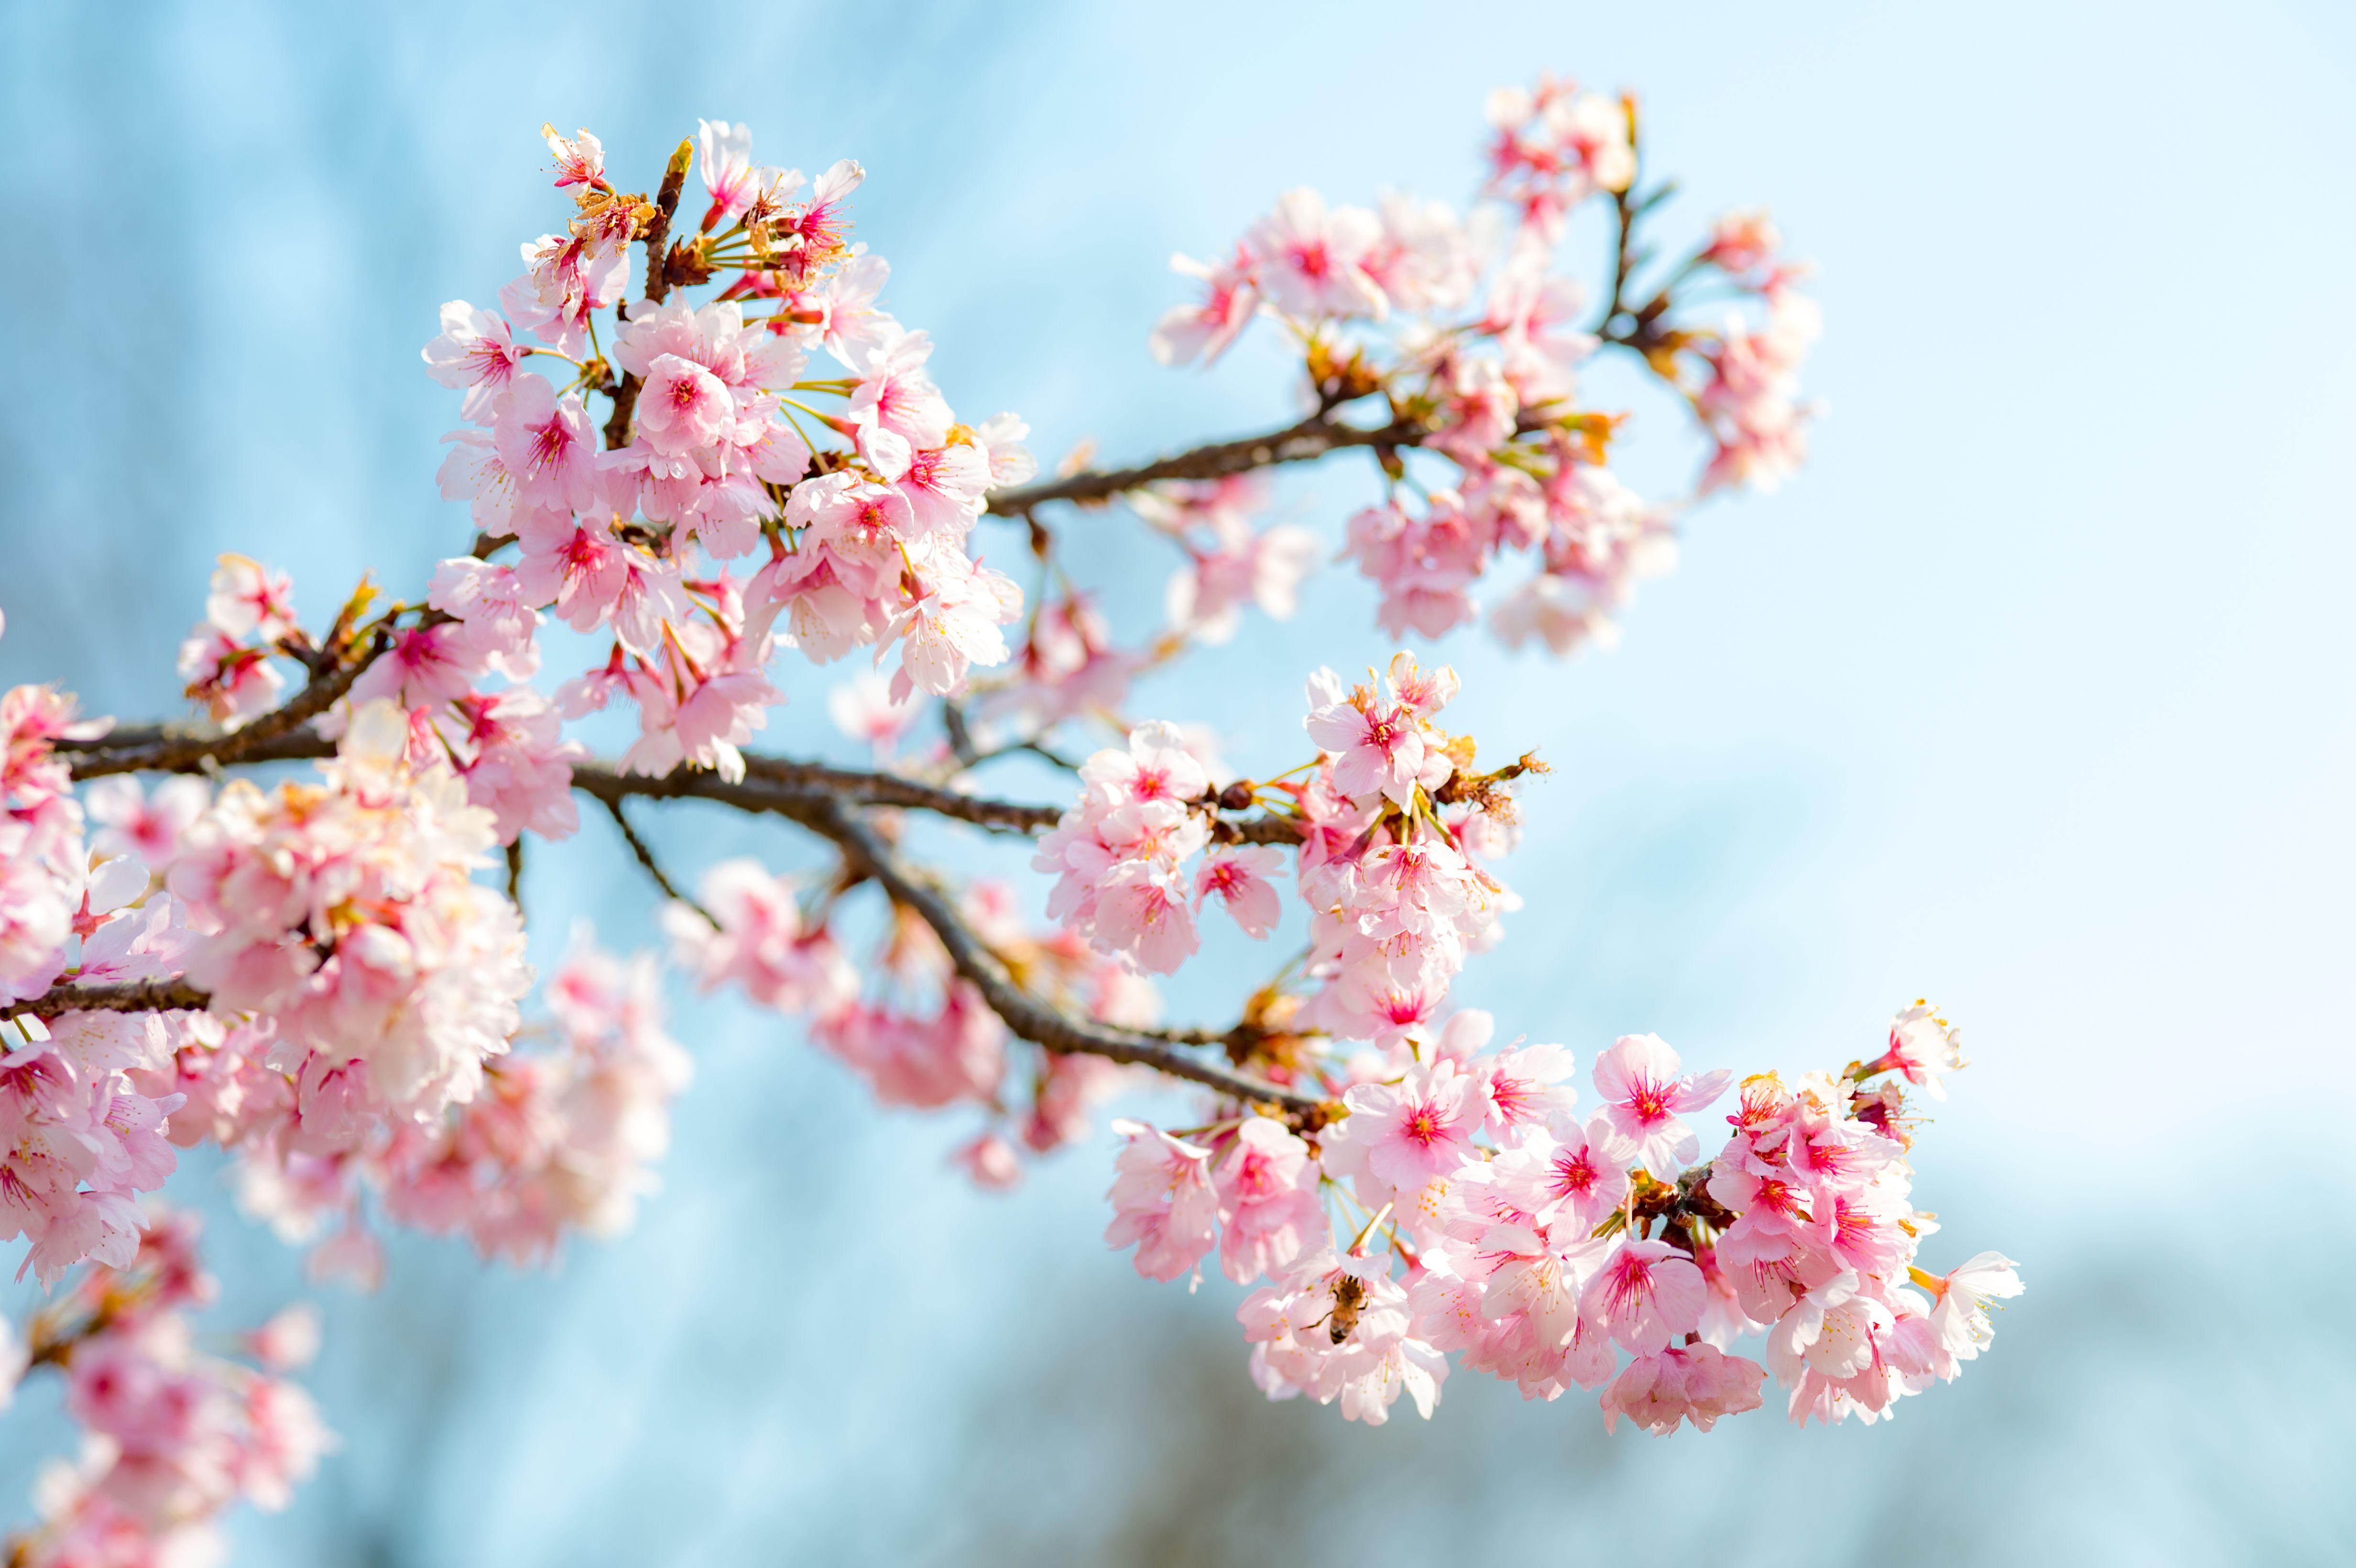 4K Cherry Blossom Wallpapers - Top Free 4K Cherry Blossom Backgrounds ...